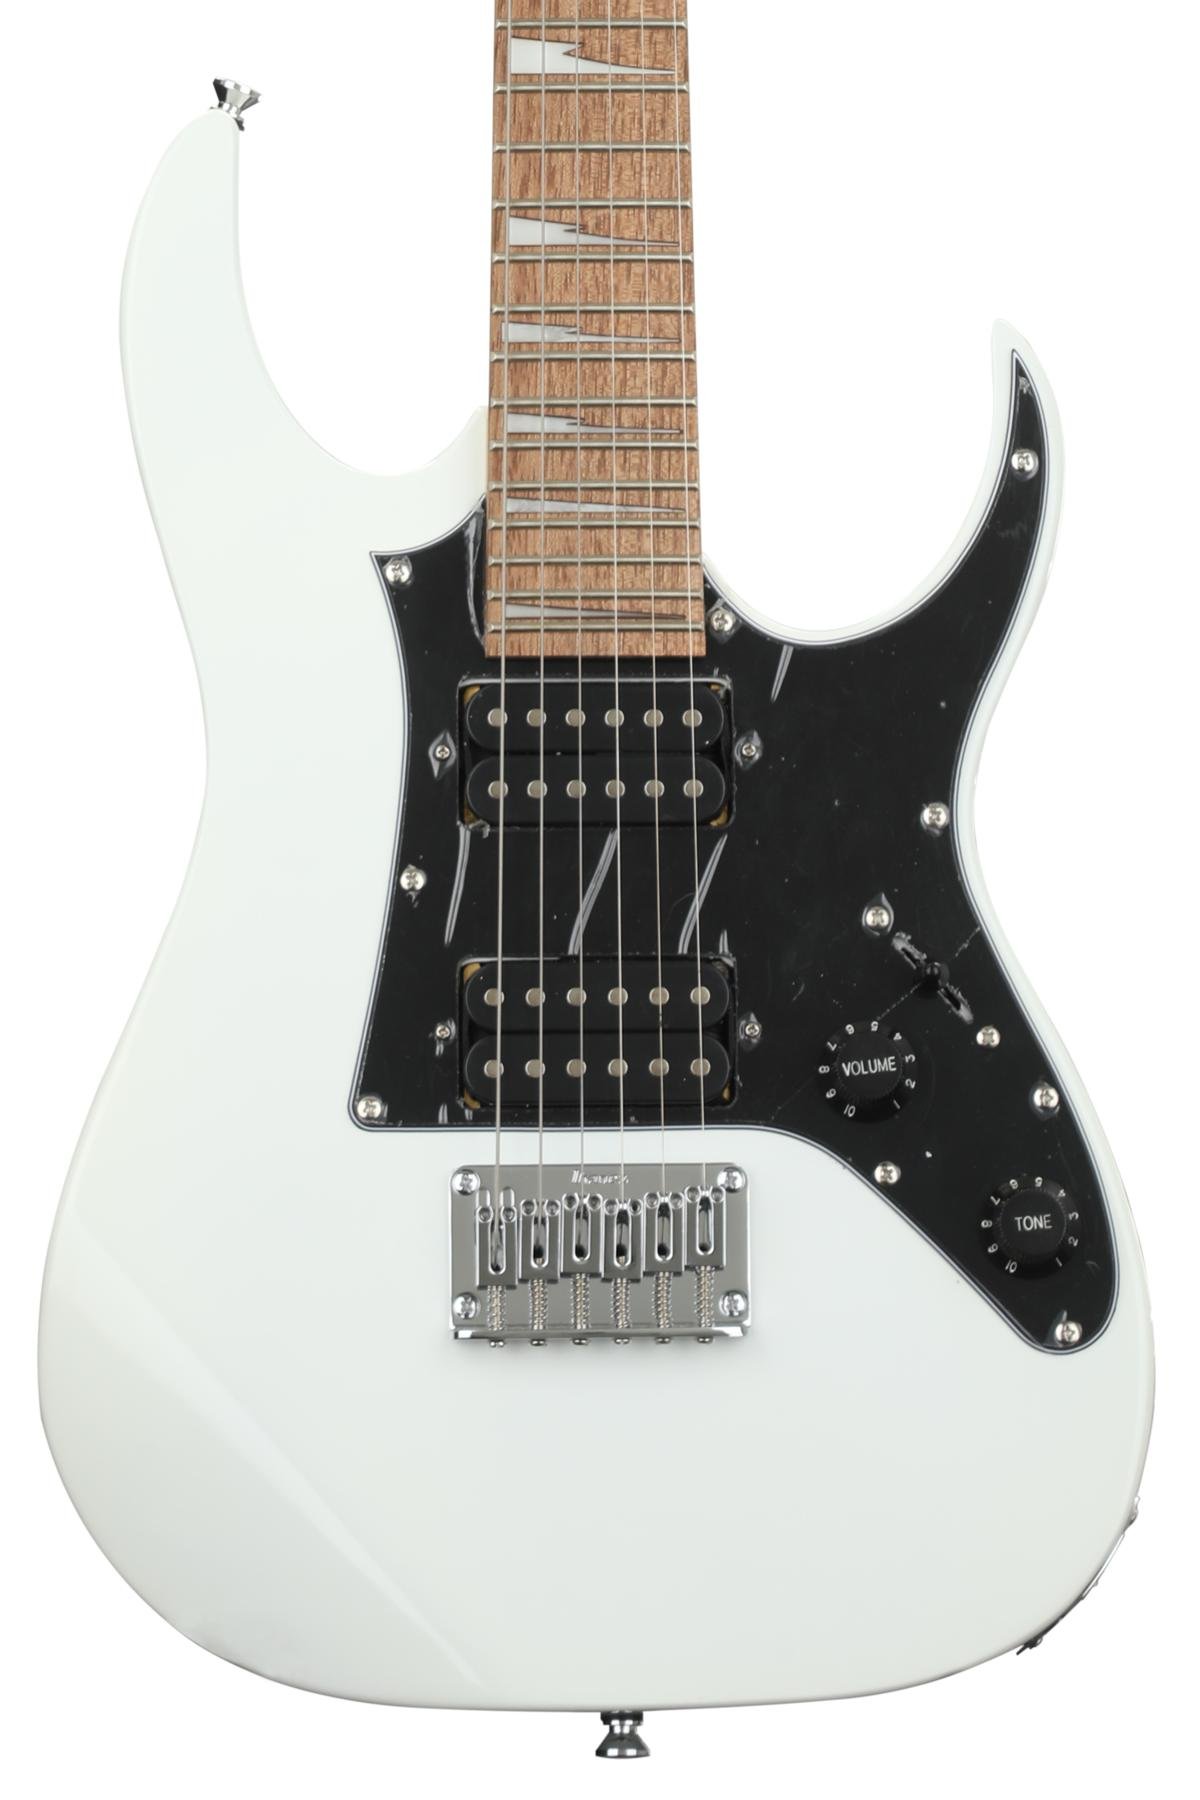 Ibanez miKro GRGM21 Electric Guitar - White | Sweetwater